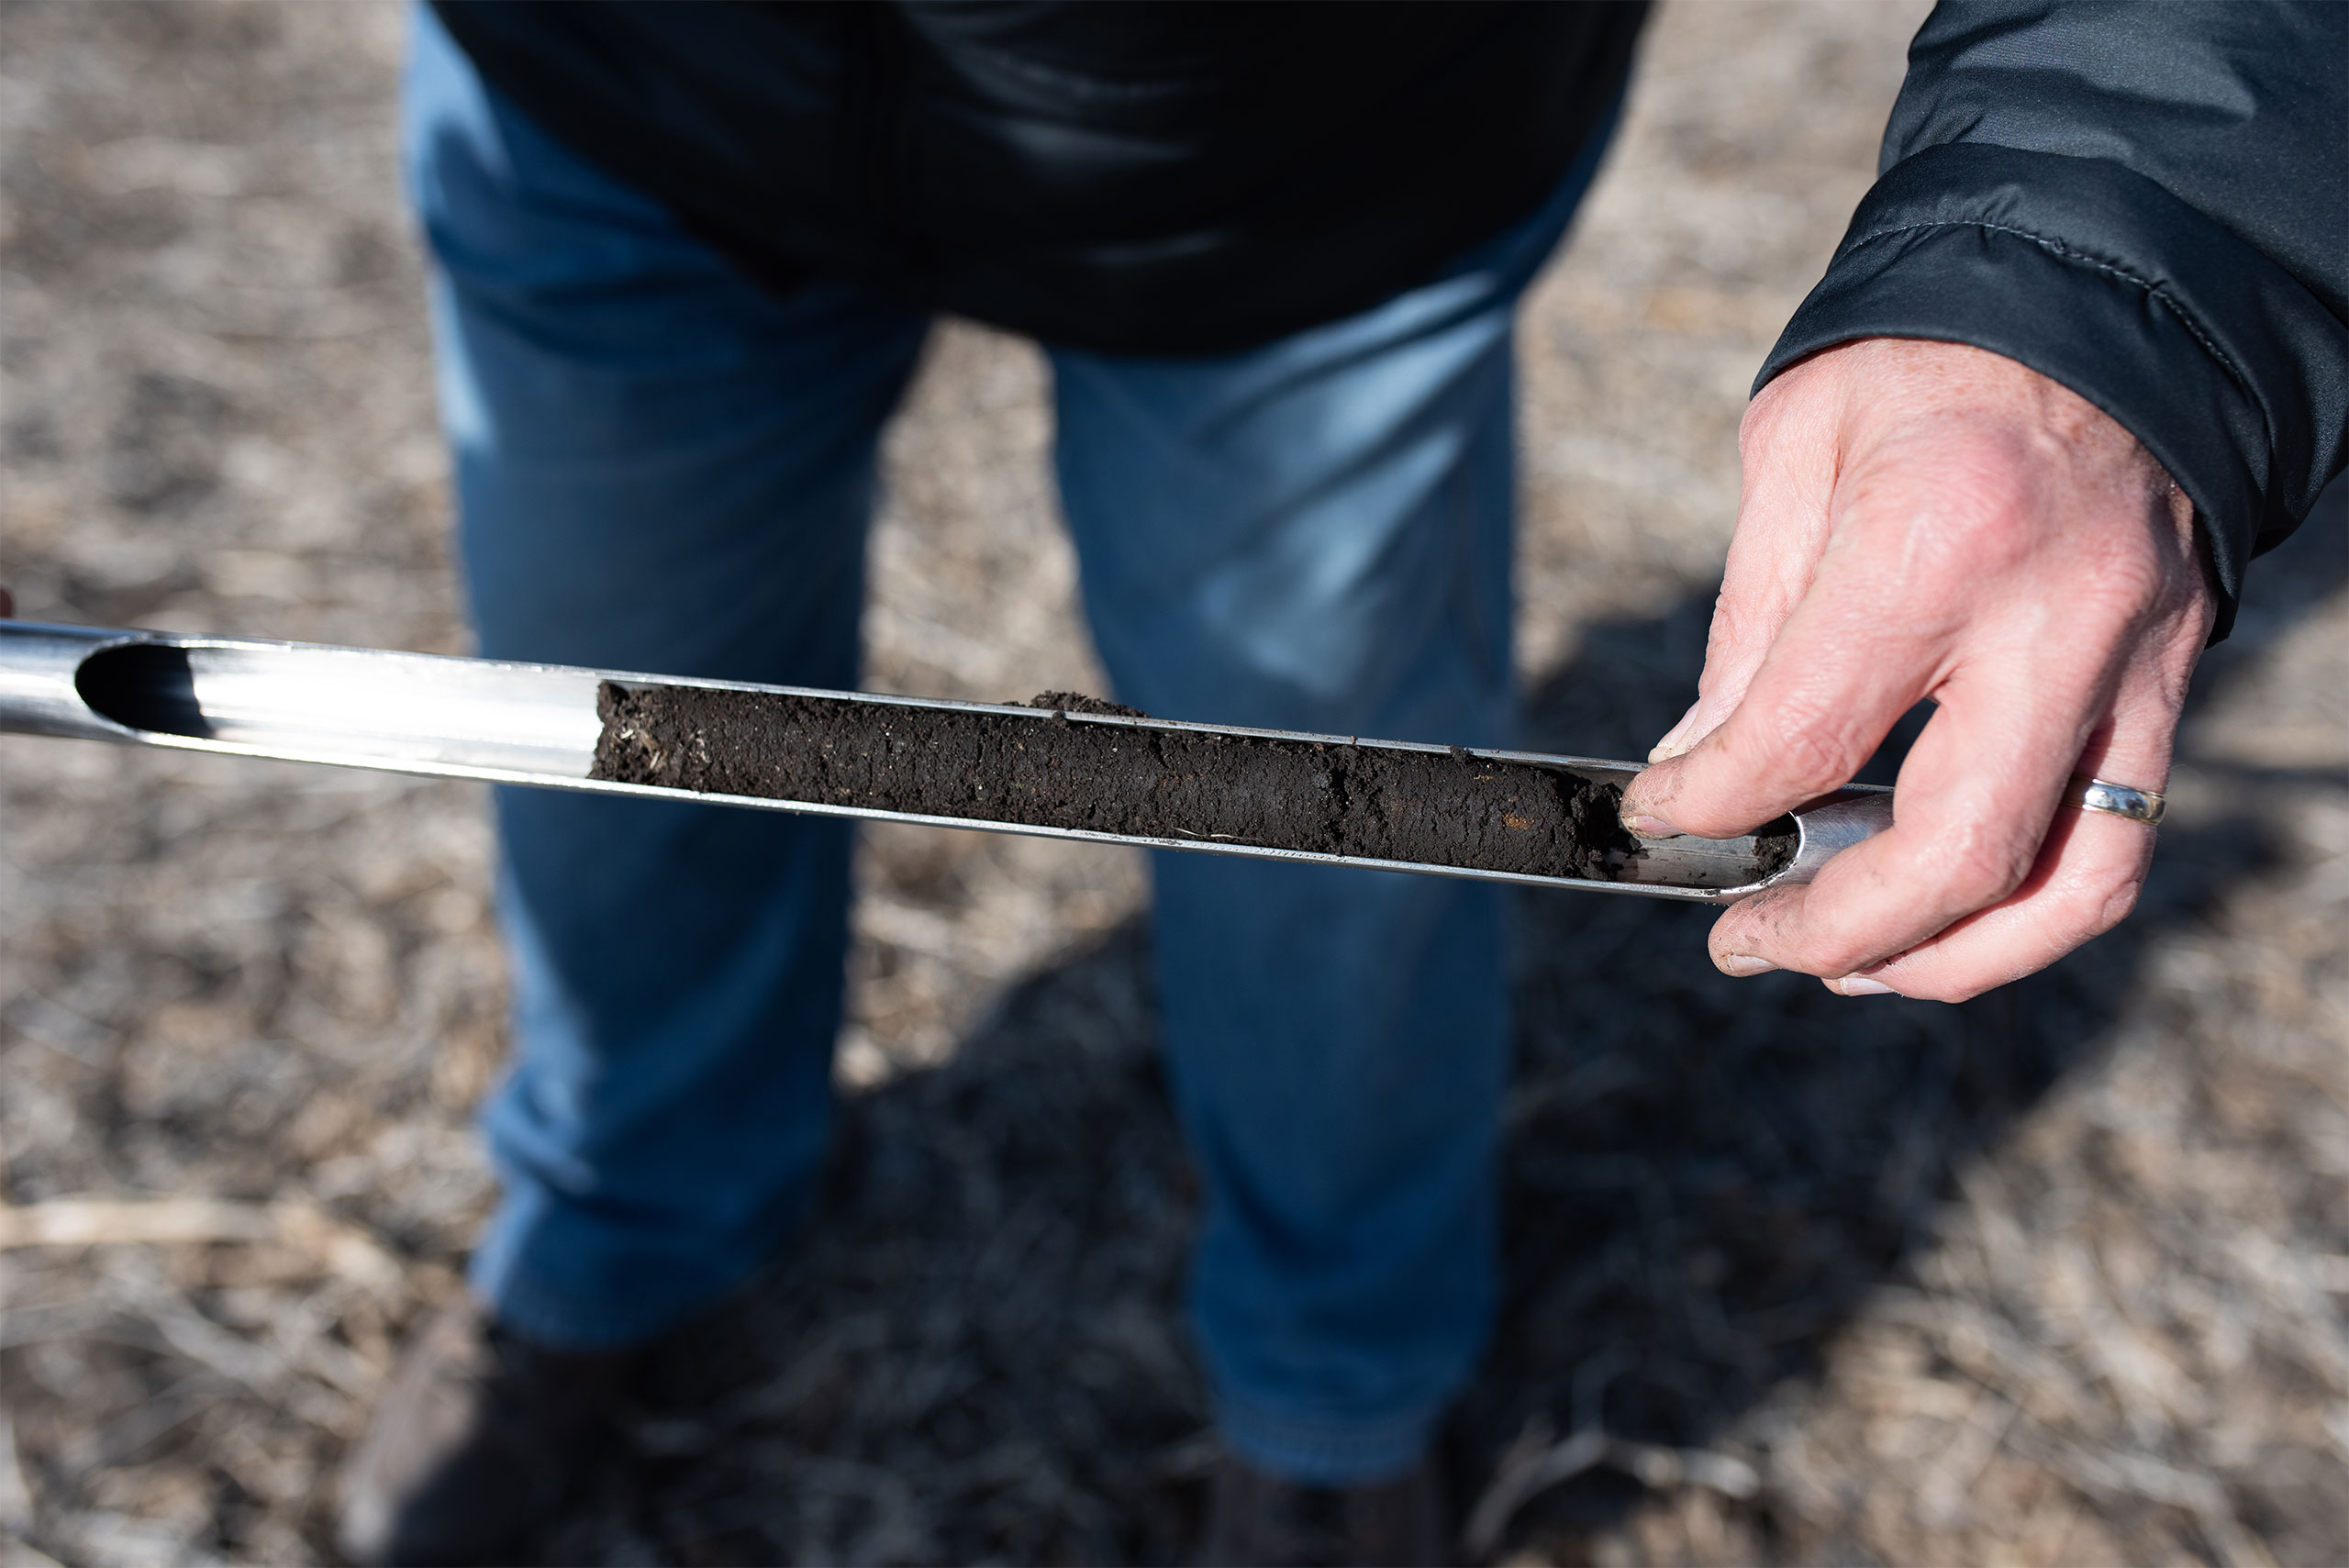 A person holds a soil sample loaded with a soil core.